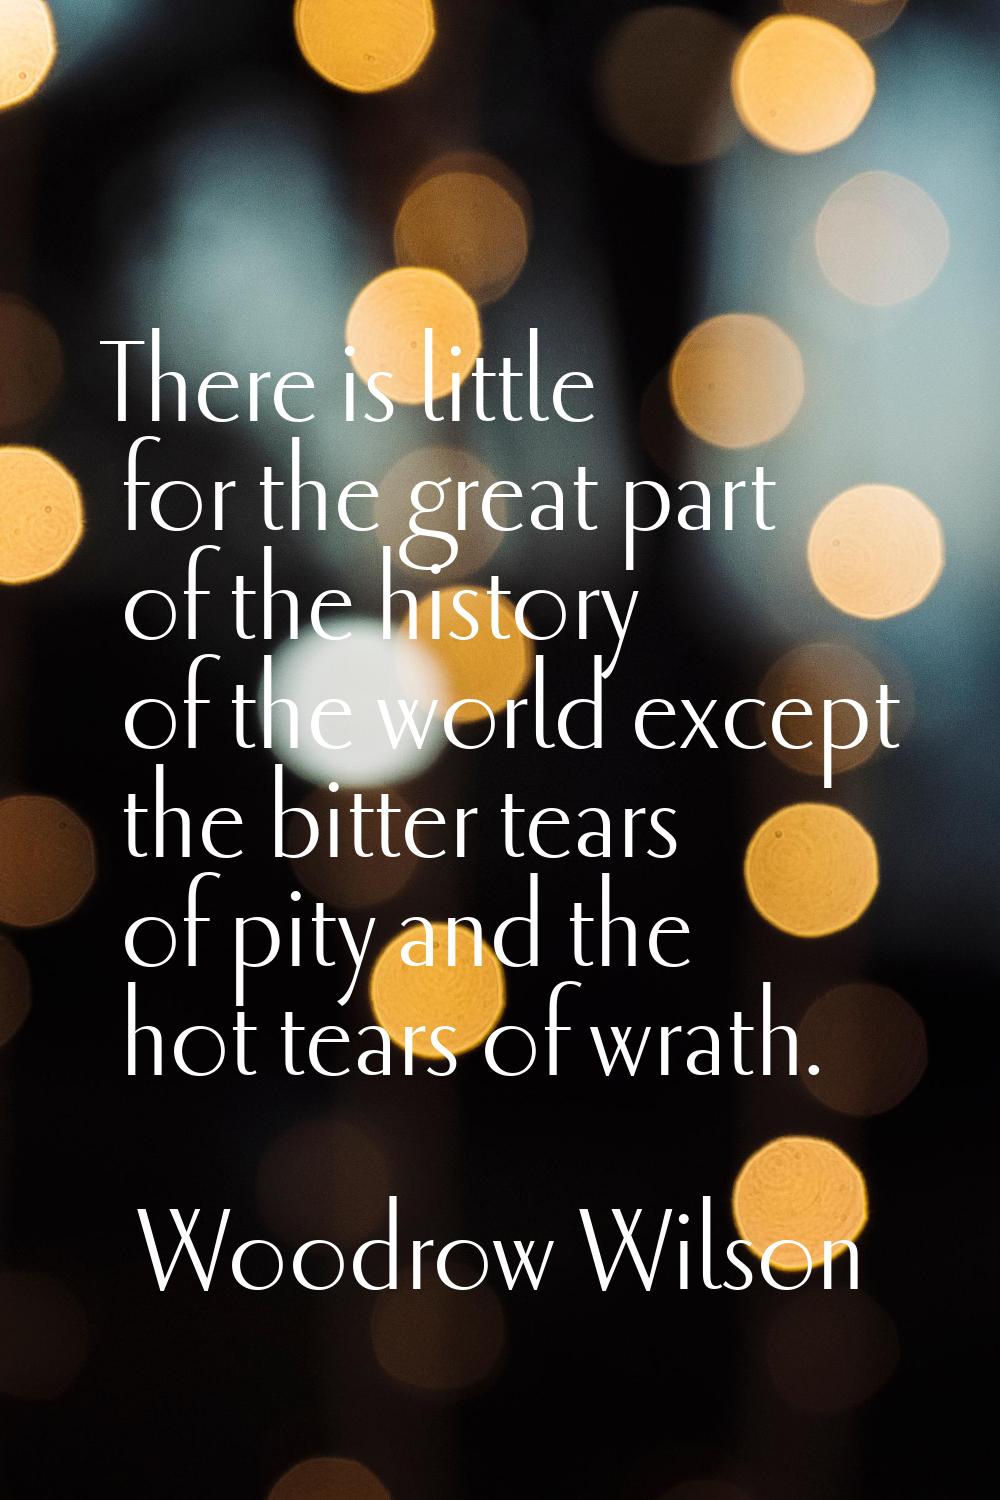 There is little for the great part of the history of the world except the bitter tears of pity and 